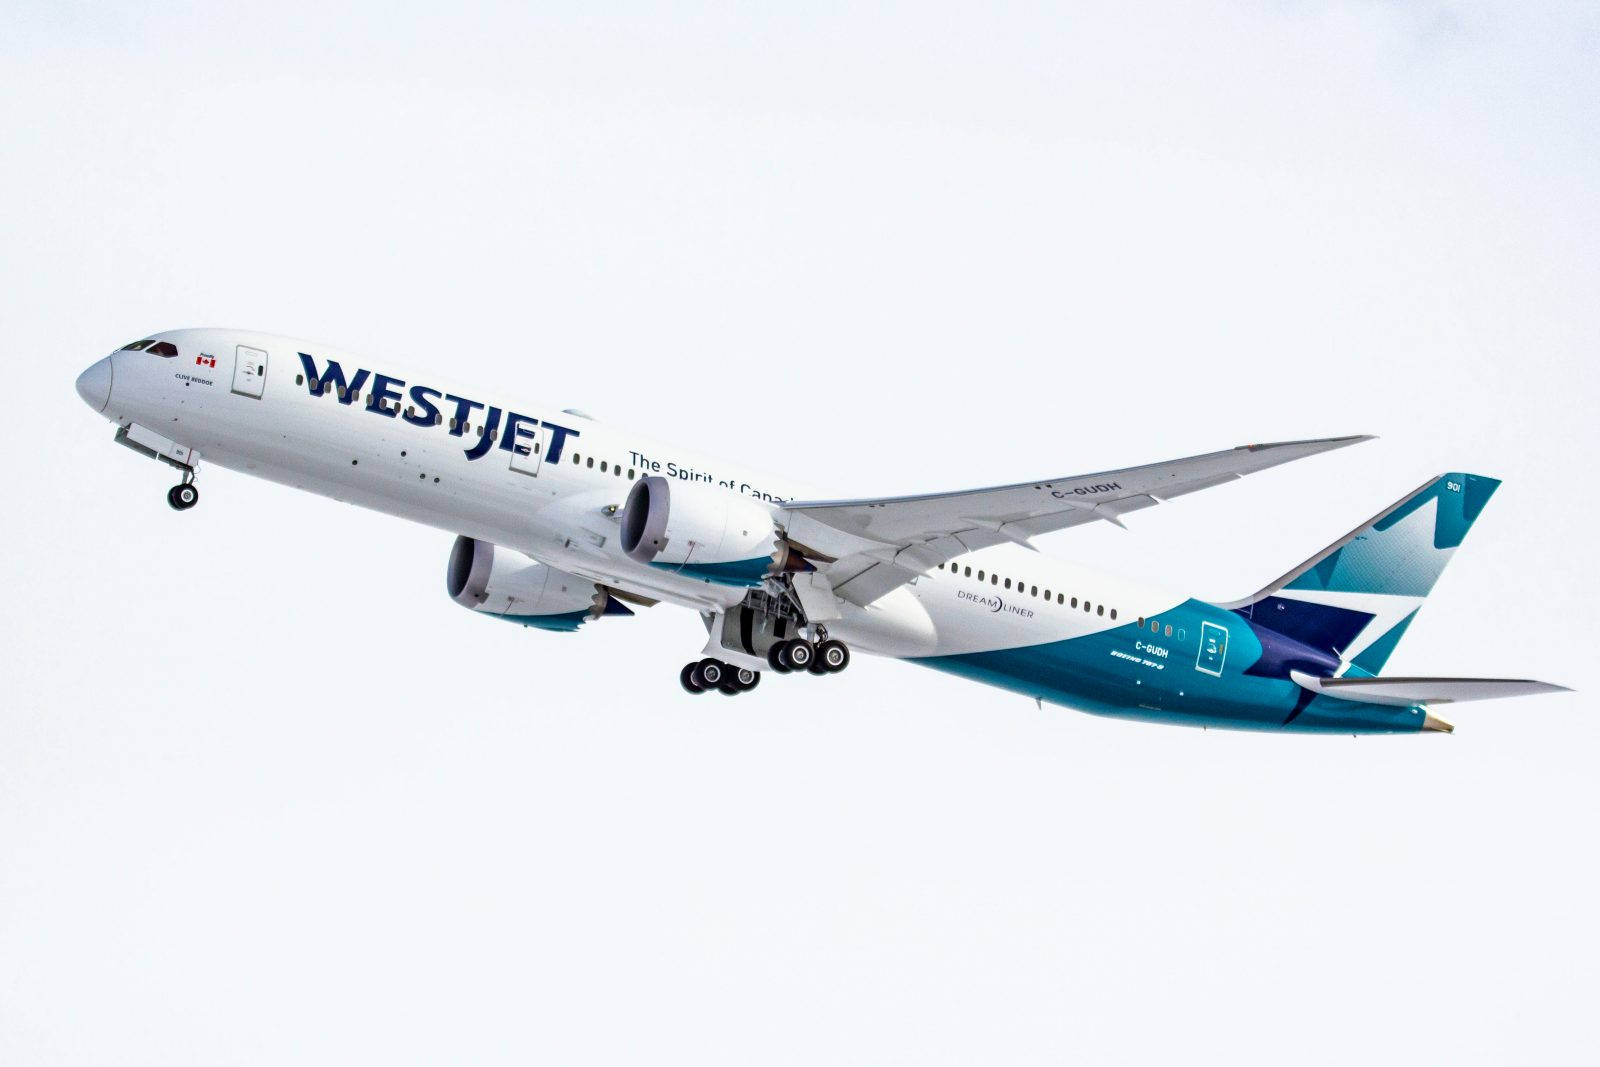 Fly WestJet-fly over Rocky Mountains Wallpaper